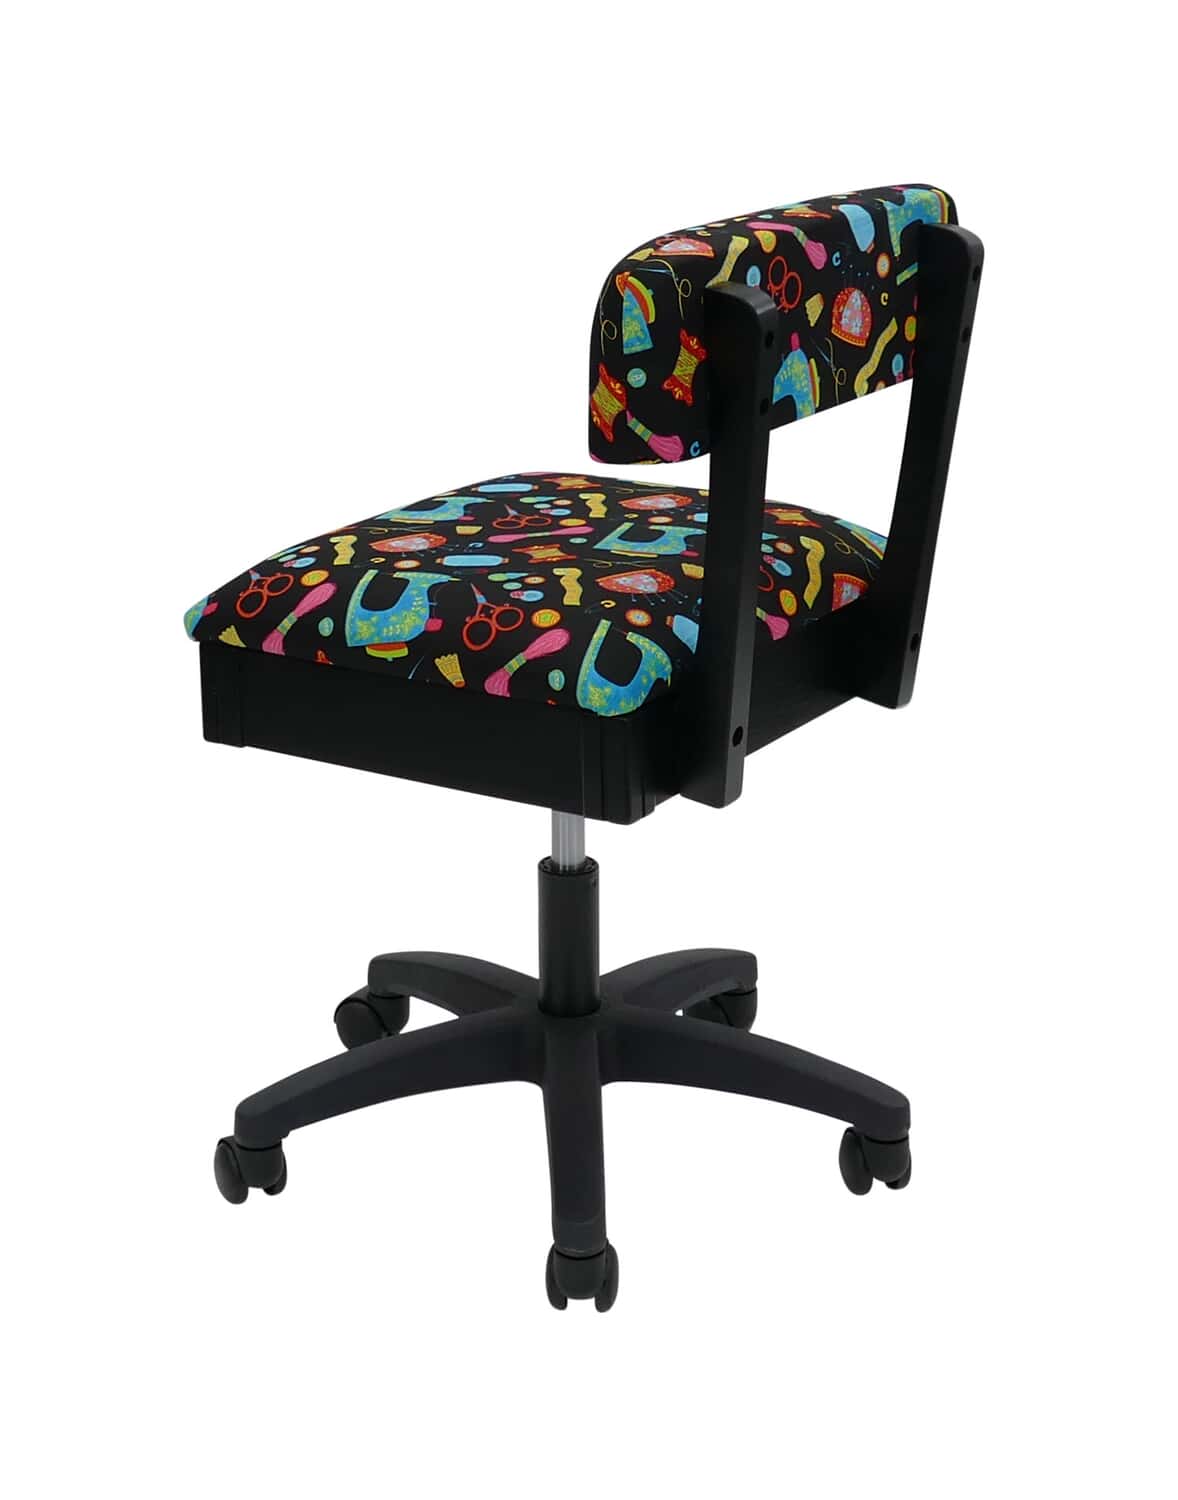 Arrow Sewing and Craft Chair with Storage, Portable, Multiple